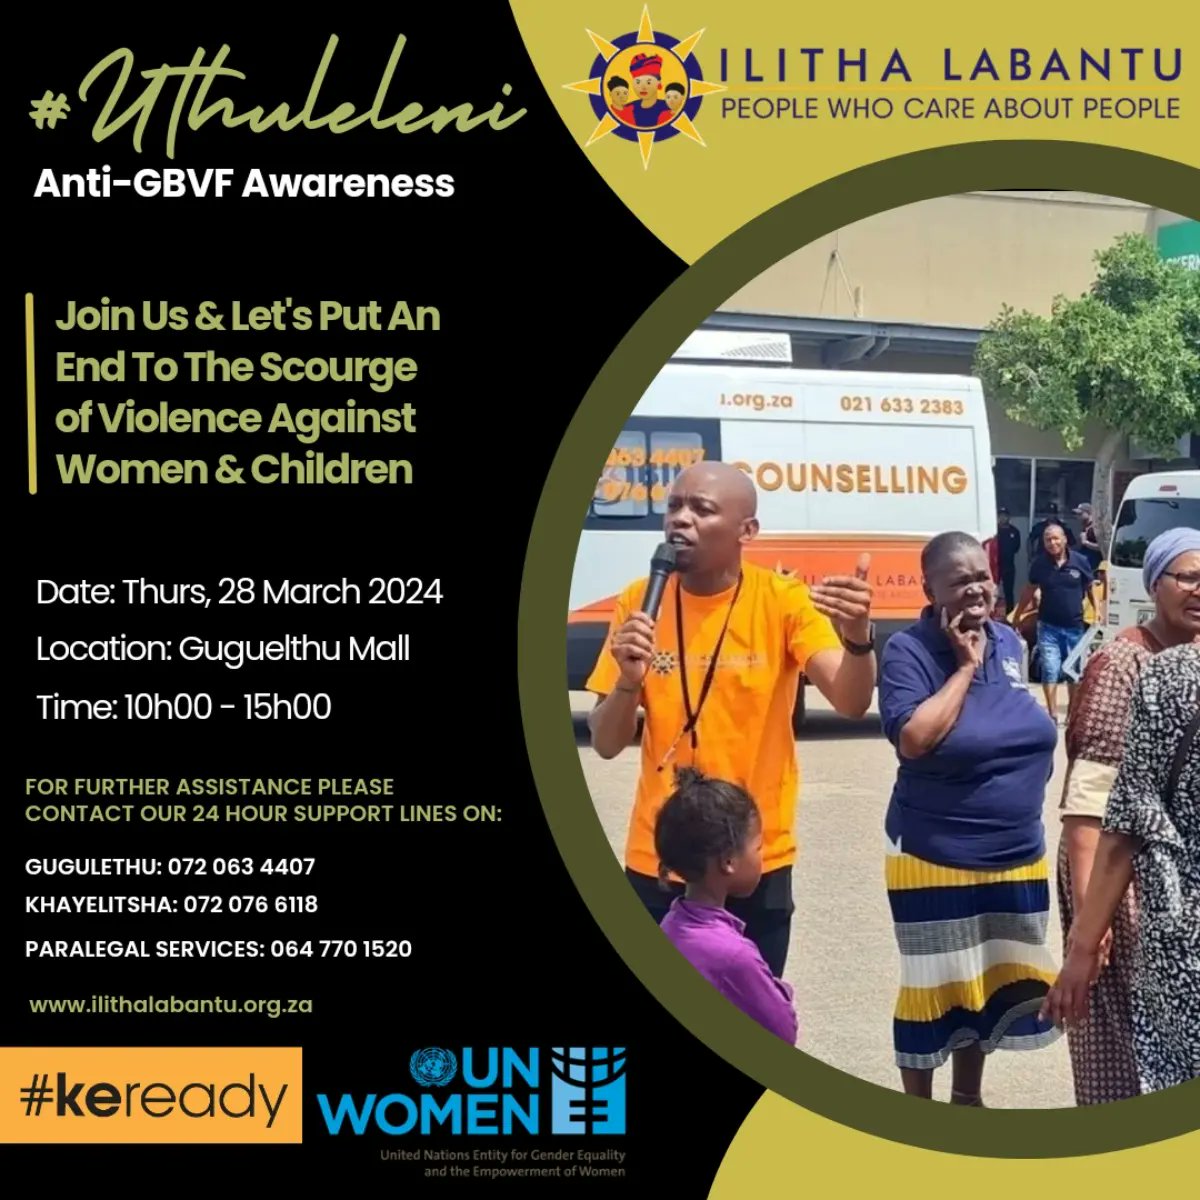 @IlithaLabantu in partnership with @unwomenSA & @kereadysa hosted the #UthuleleniAnti-GBVF Awareness at Gugulethu mall to raise awareness about the scourge of violence against women and children plaguing our communities. #EndViolenceAgainstWomenAndChildren #IlithaLabantu35years